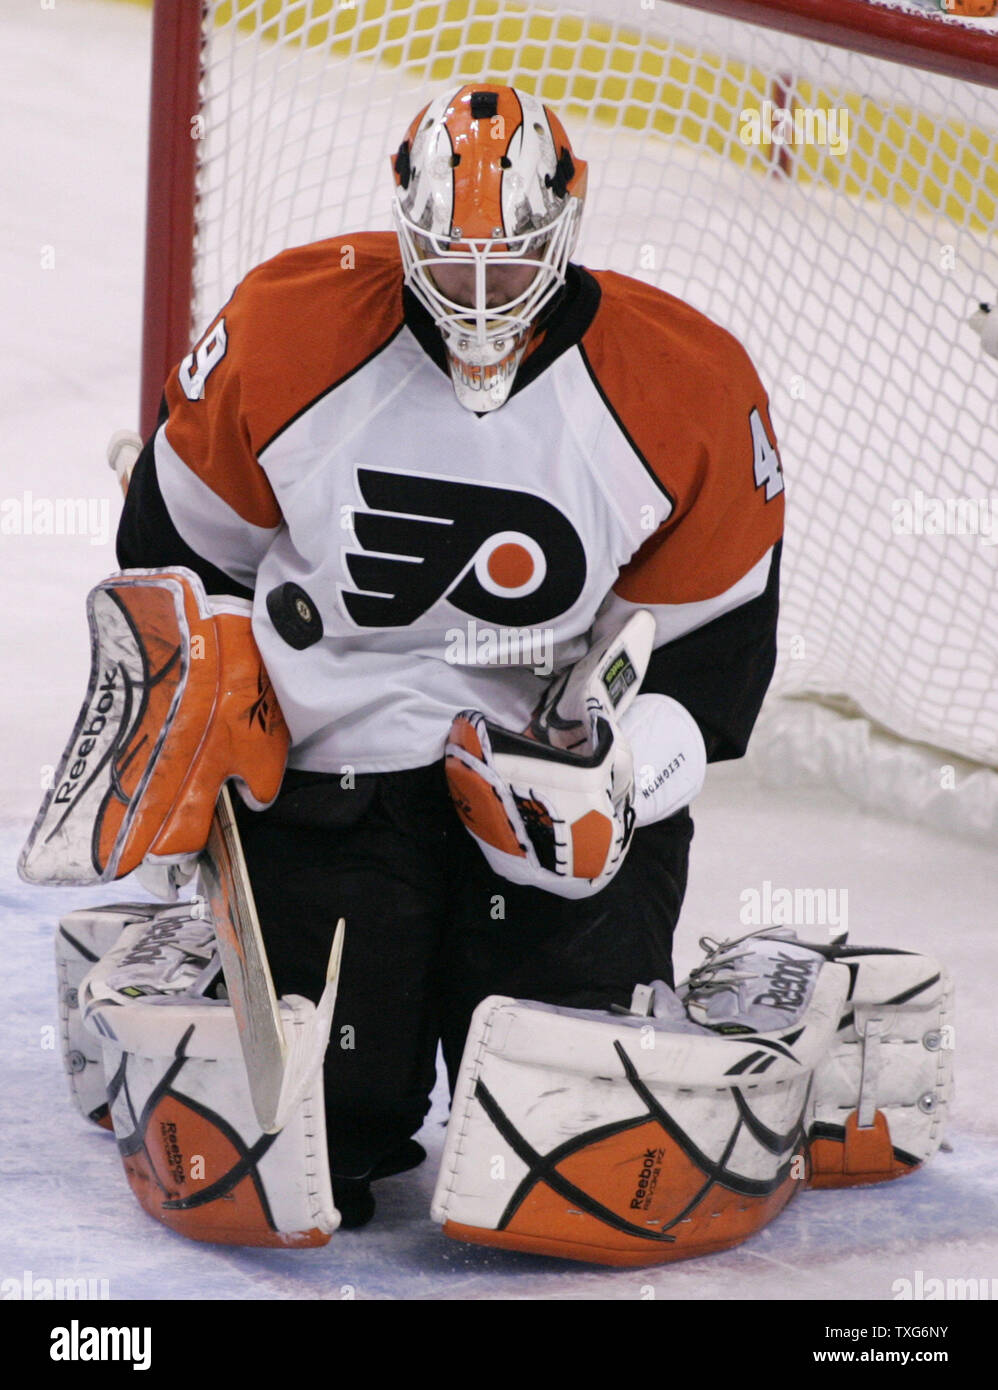 Philadelphia Flyers goalie Michael Leighton during the second period of  game four of the 2010 Stanley Cup Final in Philadelphia on June 4, 2010.  The Flyers defeated the Blackhawks 5-3. UPI/Kevin Dietsch